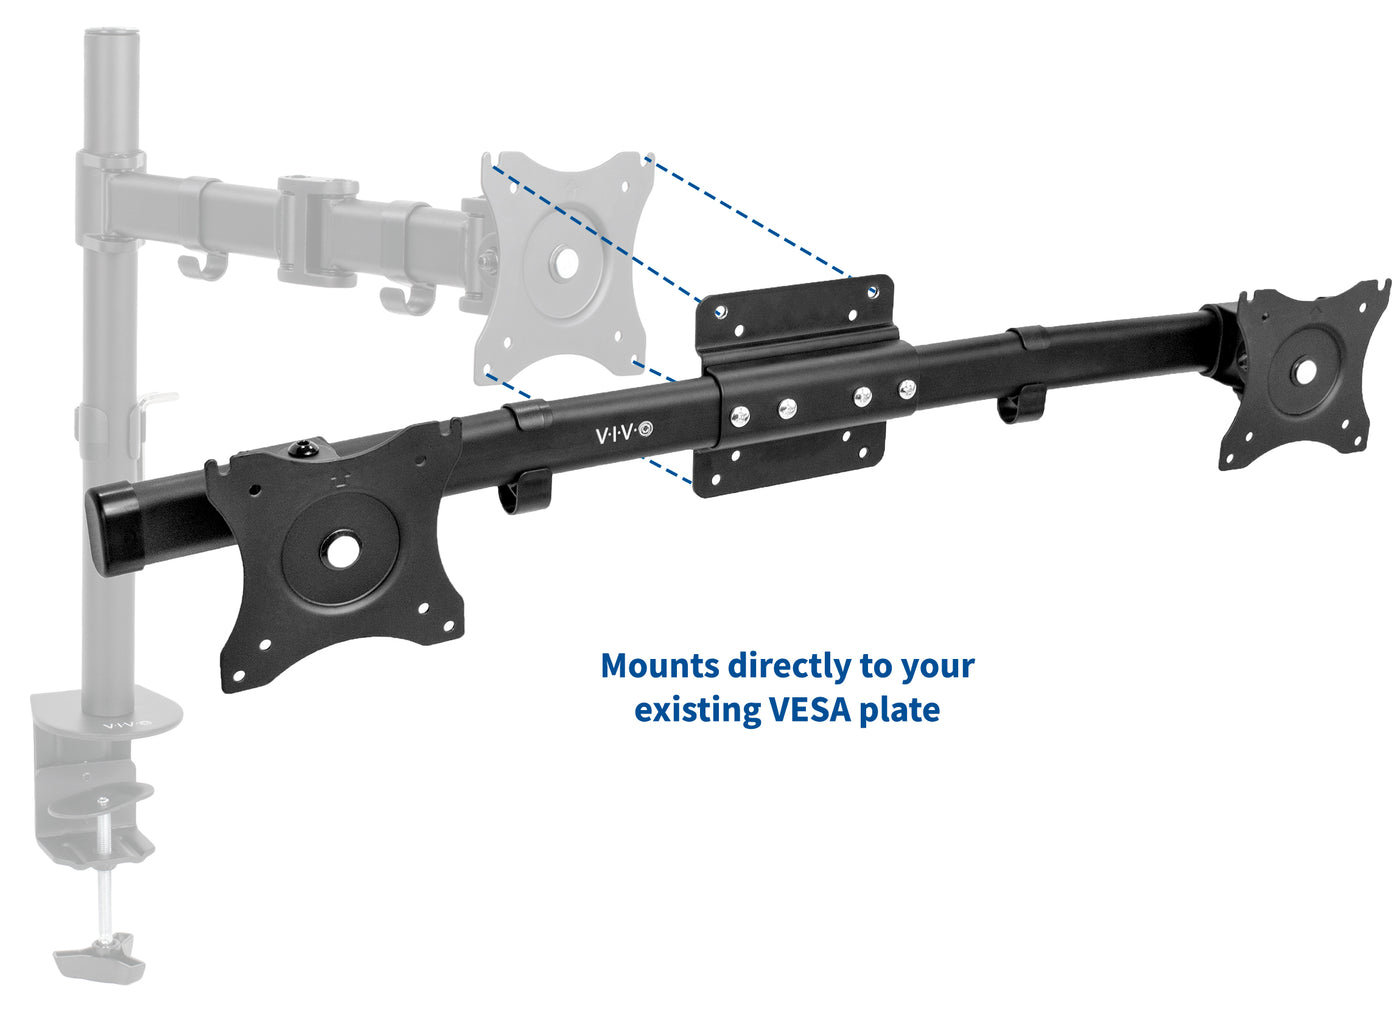 Dual mounting bracket bar allows for direct mounting to existing VESA plate.